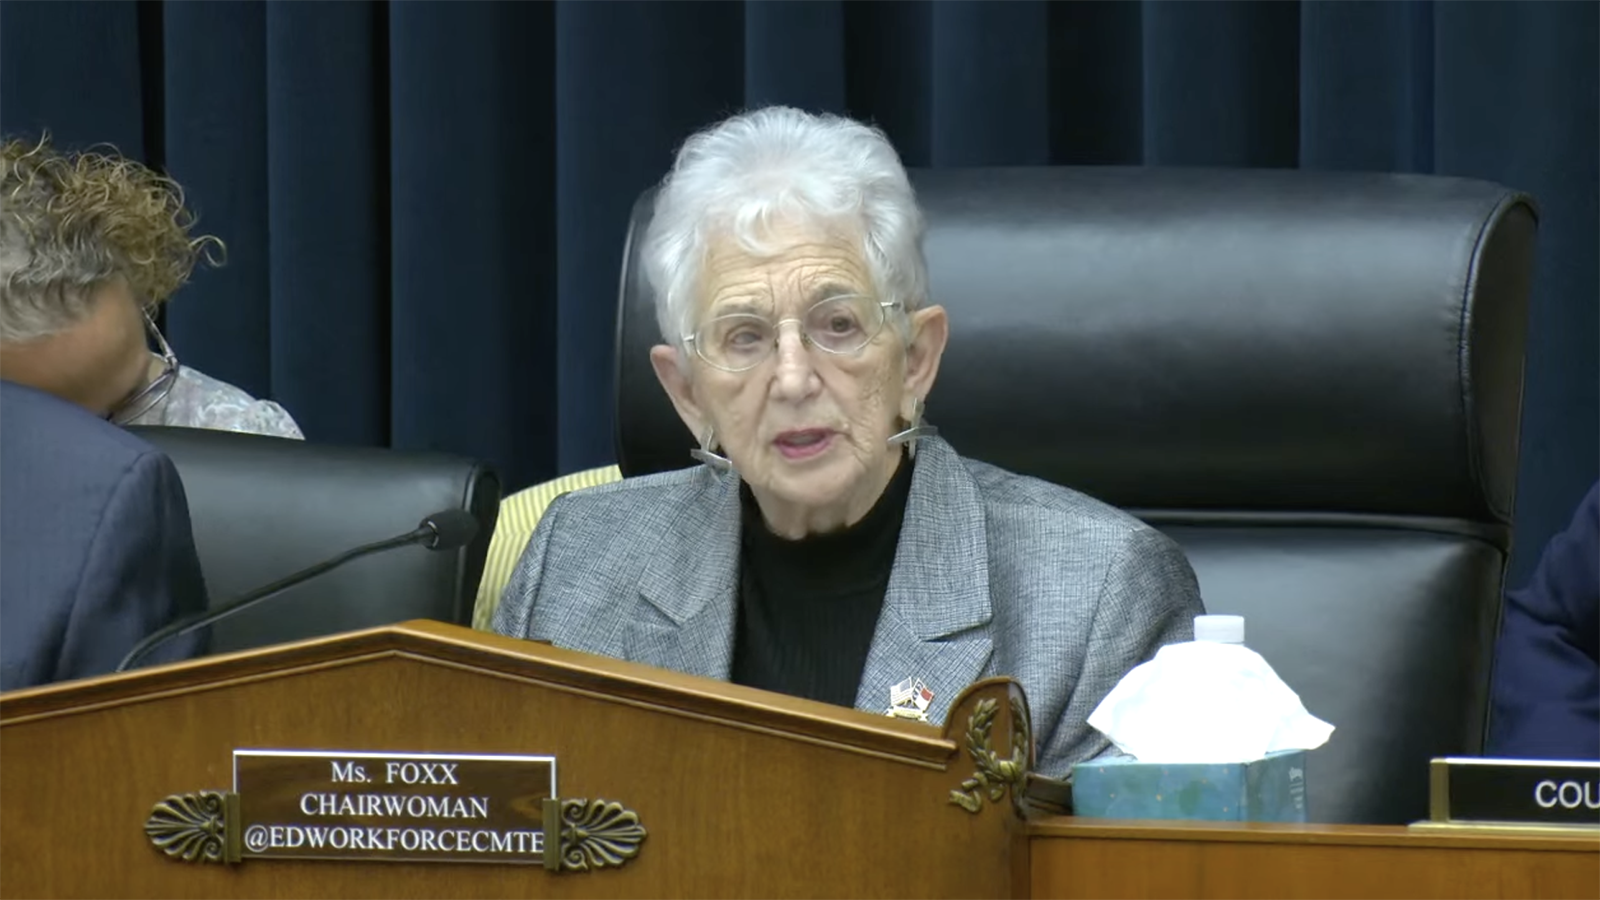 Rep. Virginia Foxx during her opening statements at the House Committee on Education and the Workforce hearing on antisemitism on college campuses today on Capitol Hill.